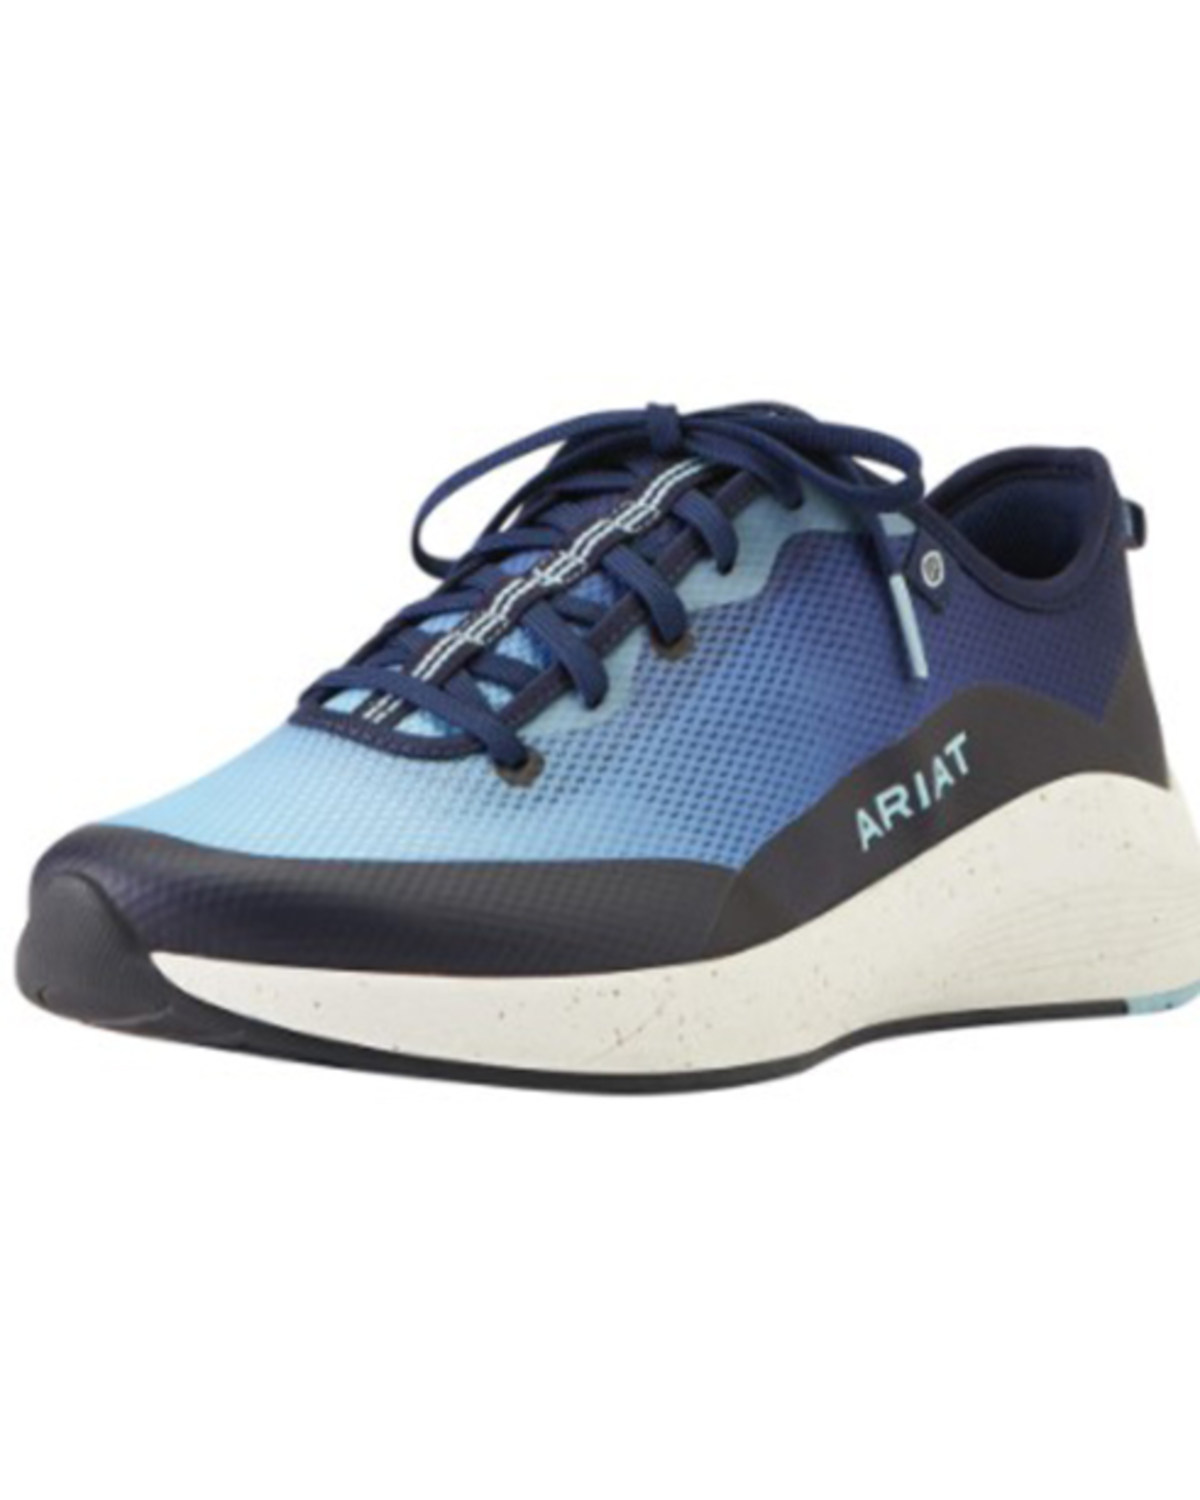 Ariat Men's Shiftrunner Waves Lace-Up Soft Work Sneakers - Round Toe